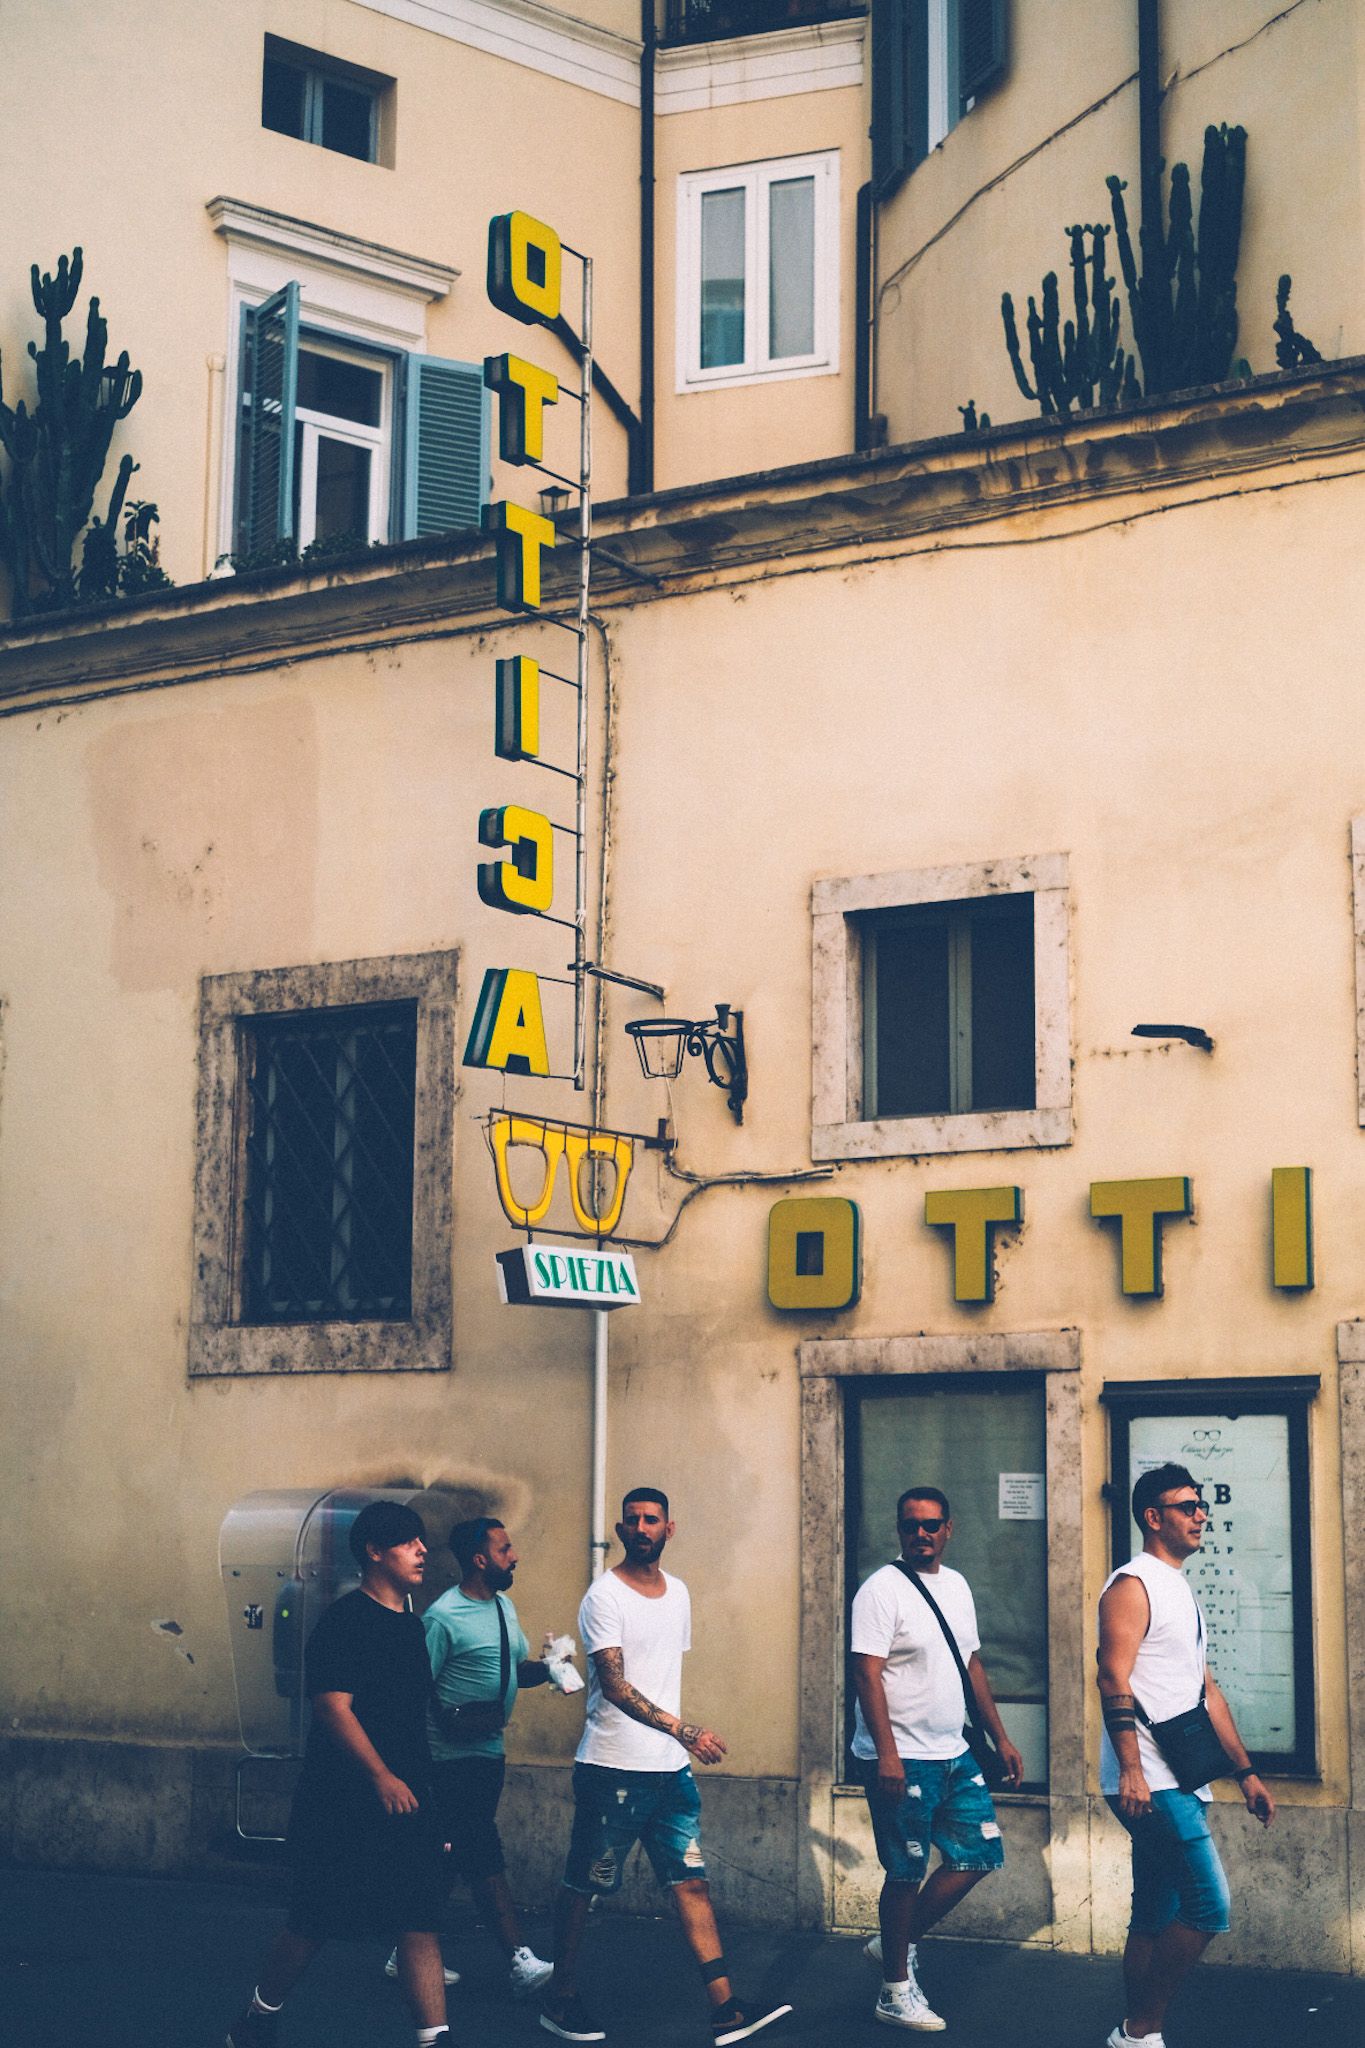 A group of men, mostly in white t-shirts, walks past a yellow sign that says “Ottica” whose bold letters stick out from the building’s faded Roman facade.